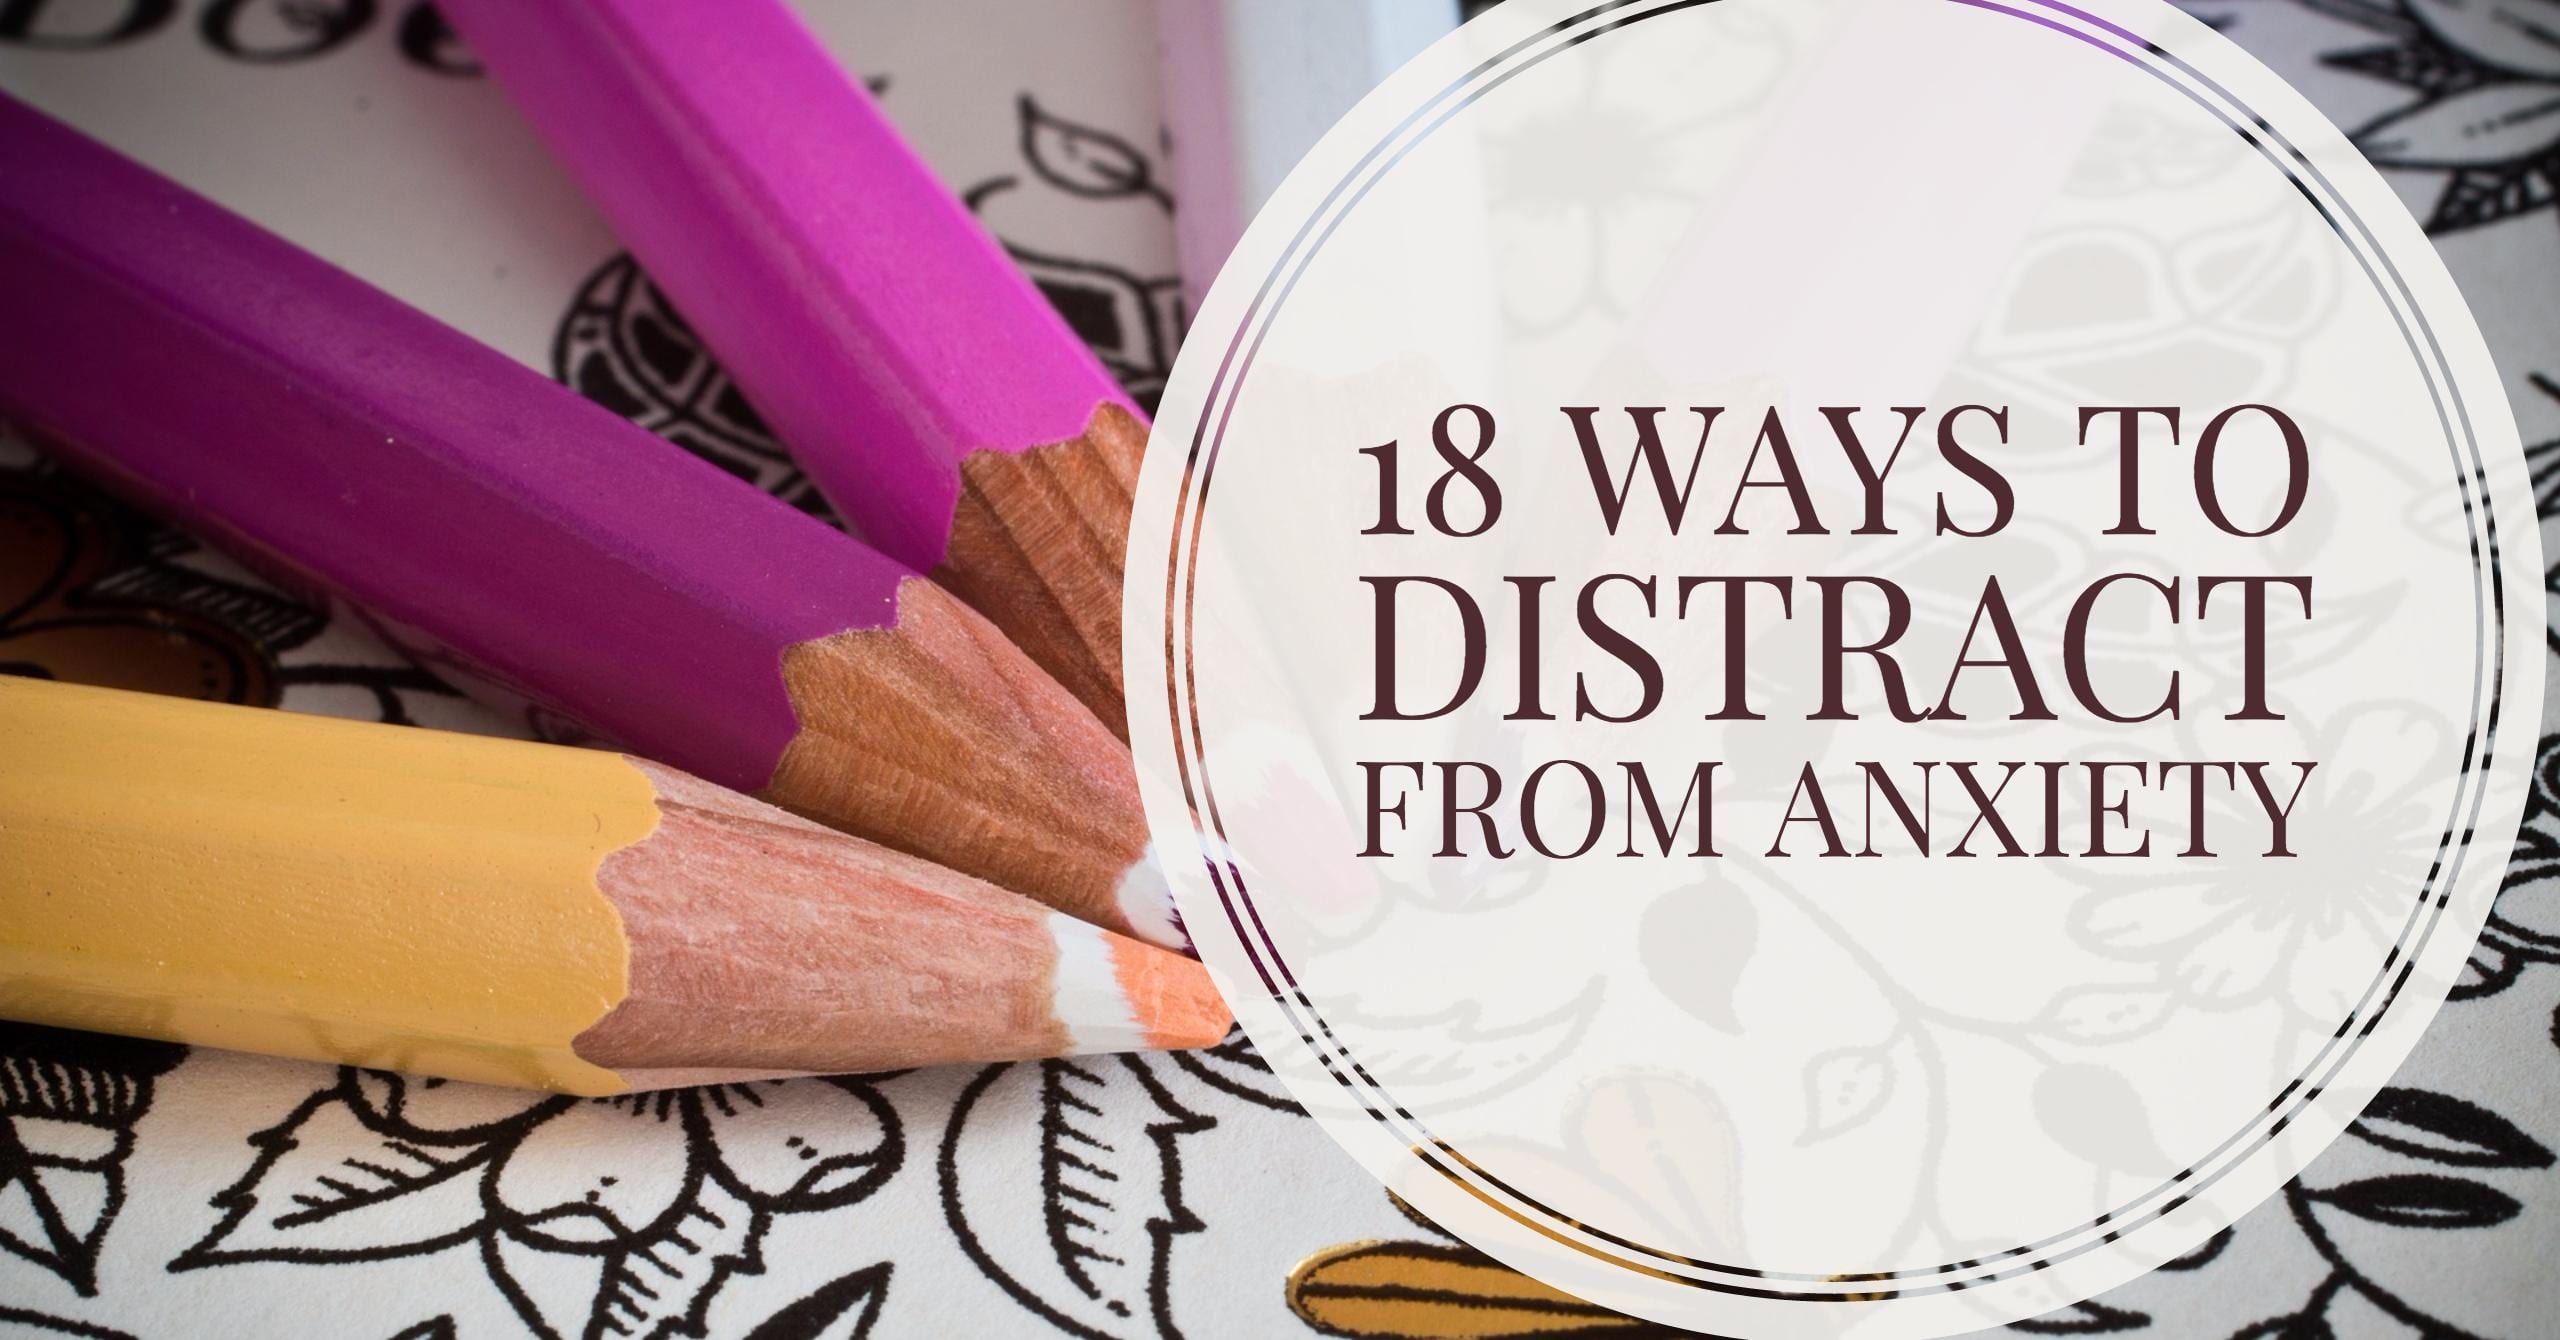 18 Ways to Distract from Anxiety